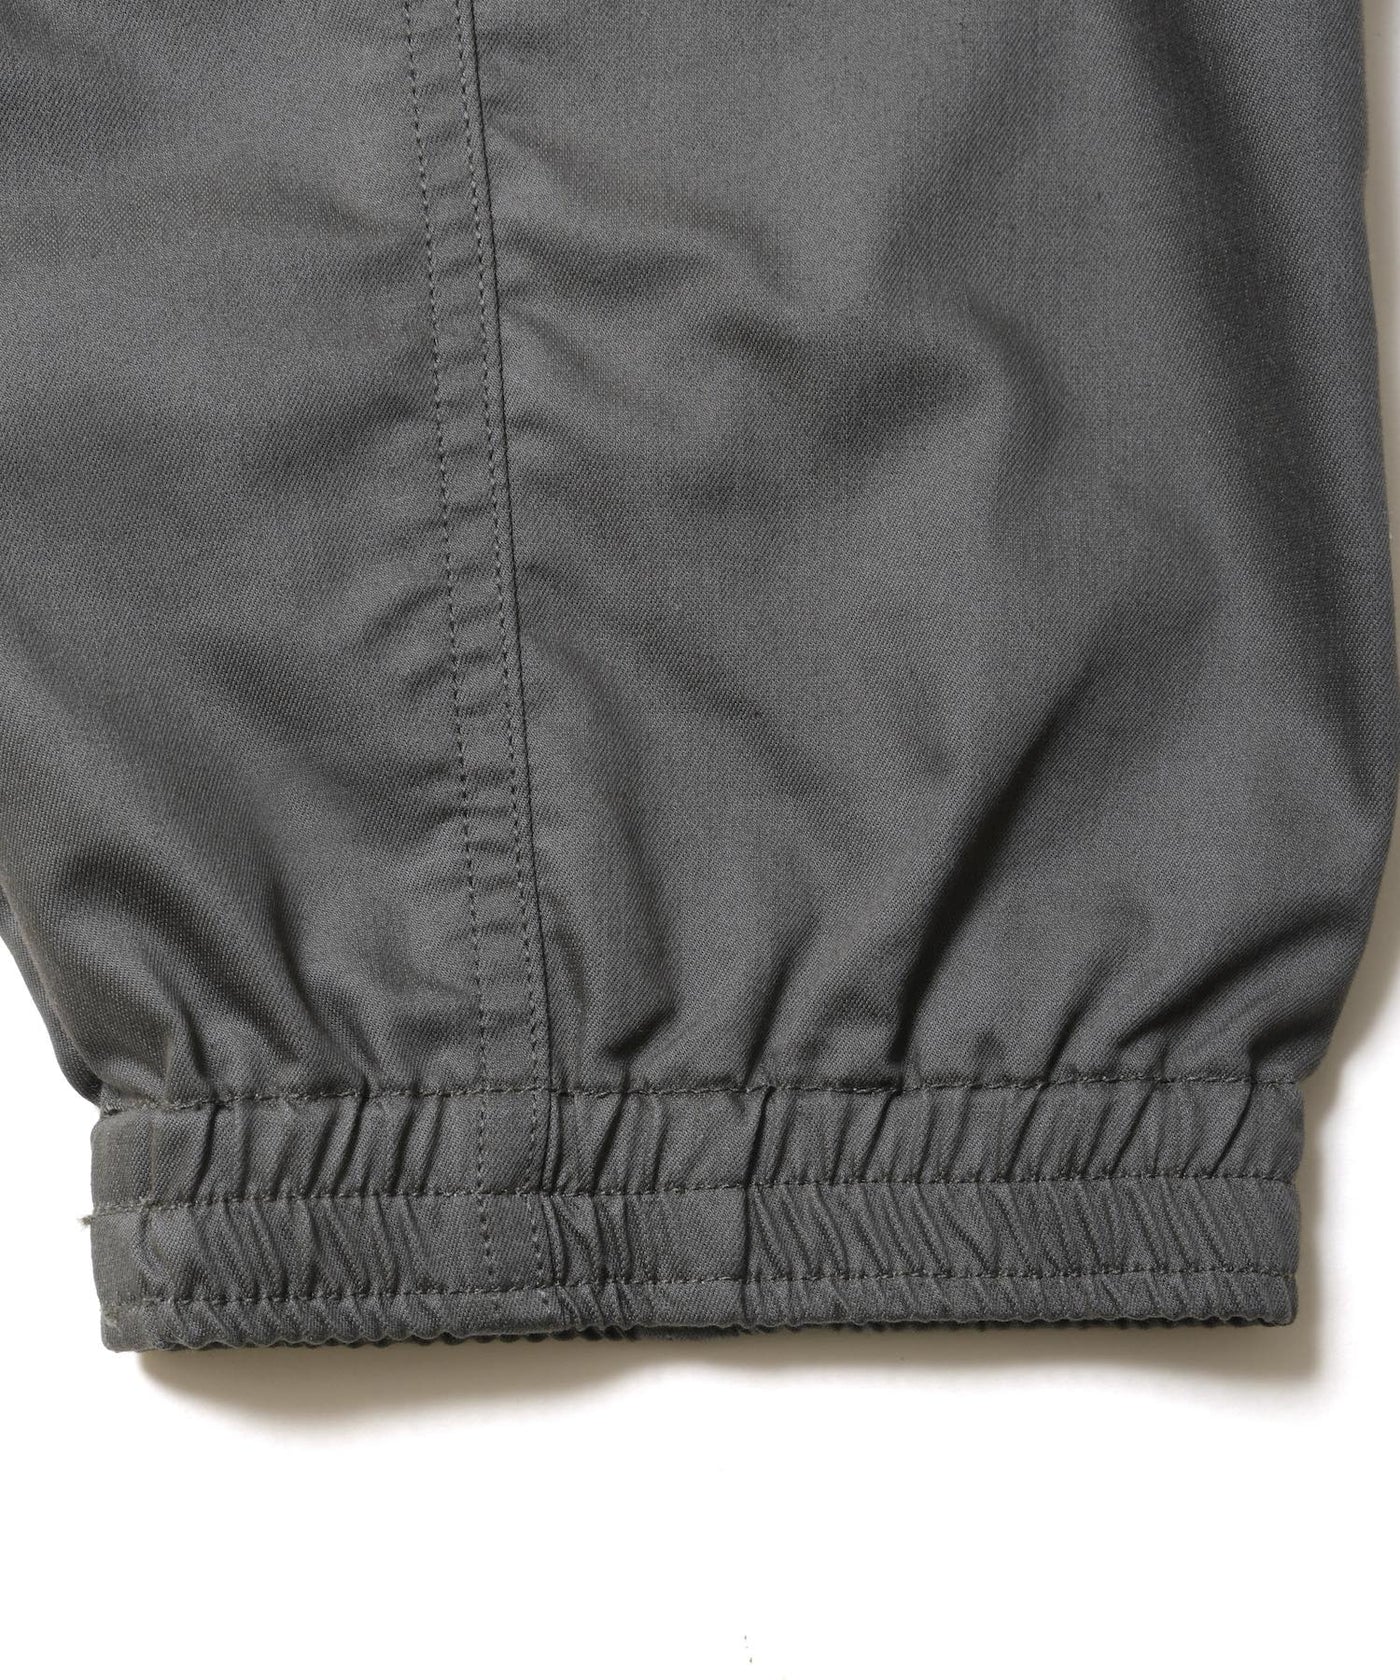 DRY COOL UTILITY JOGGER PANTS